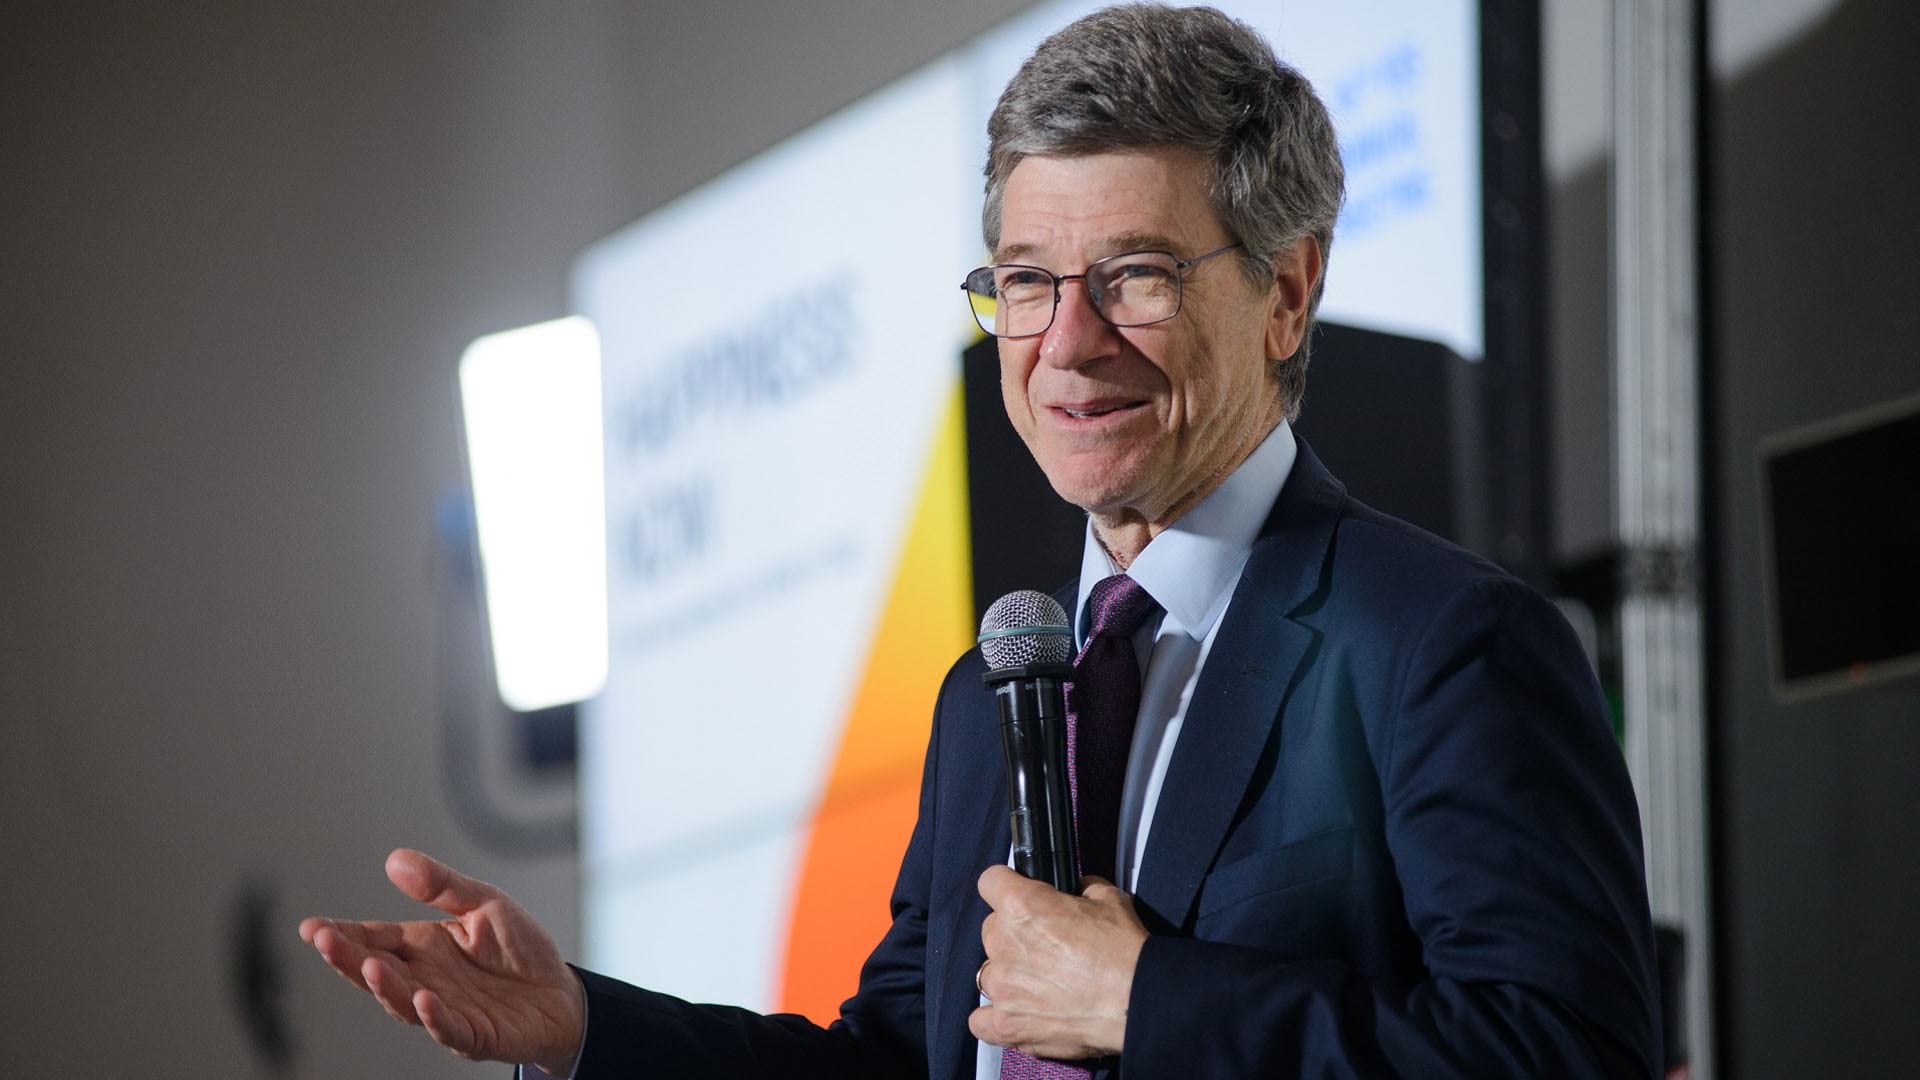 Jeffrey Sachs, Columbia University professor, director of the United Nations (UN) Sustainable Development Solutions Network